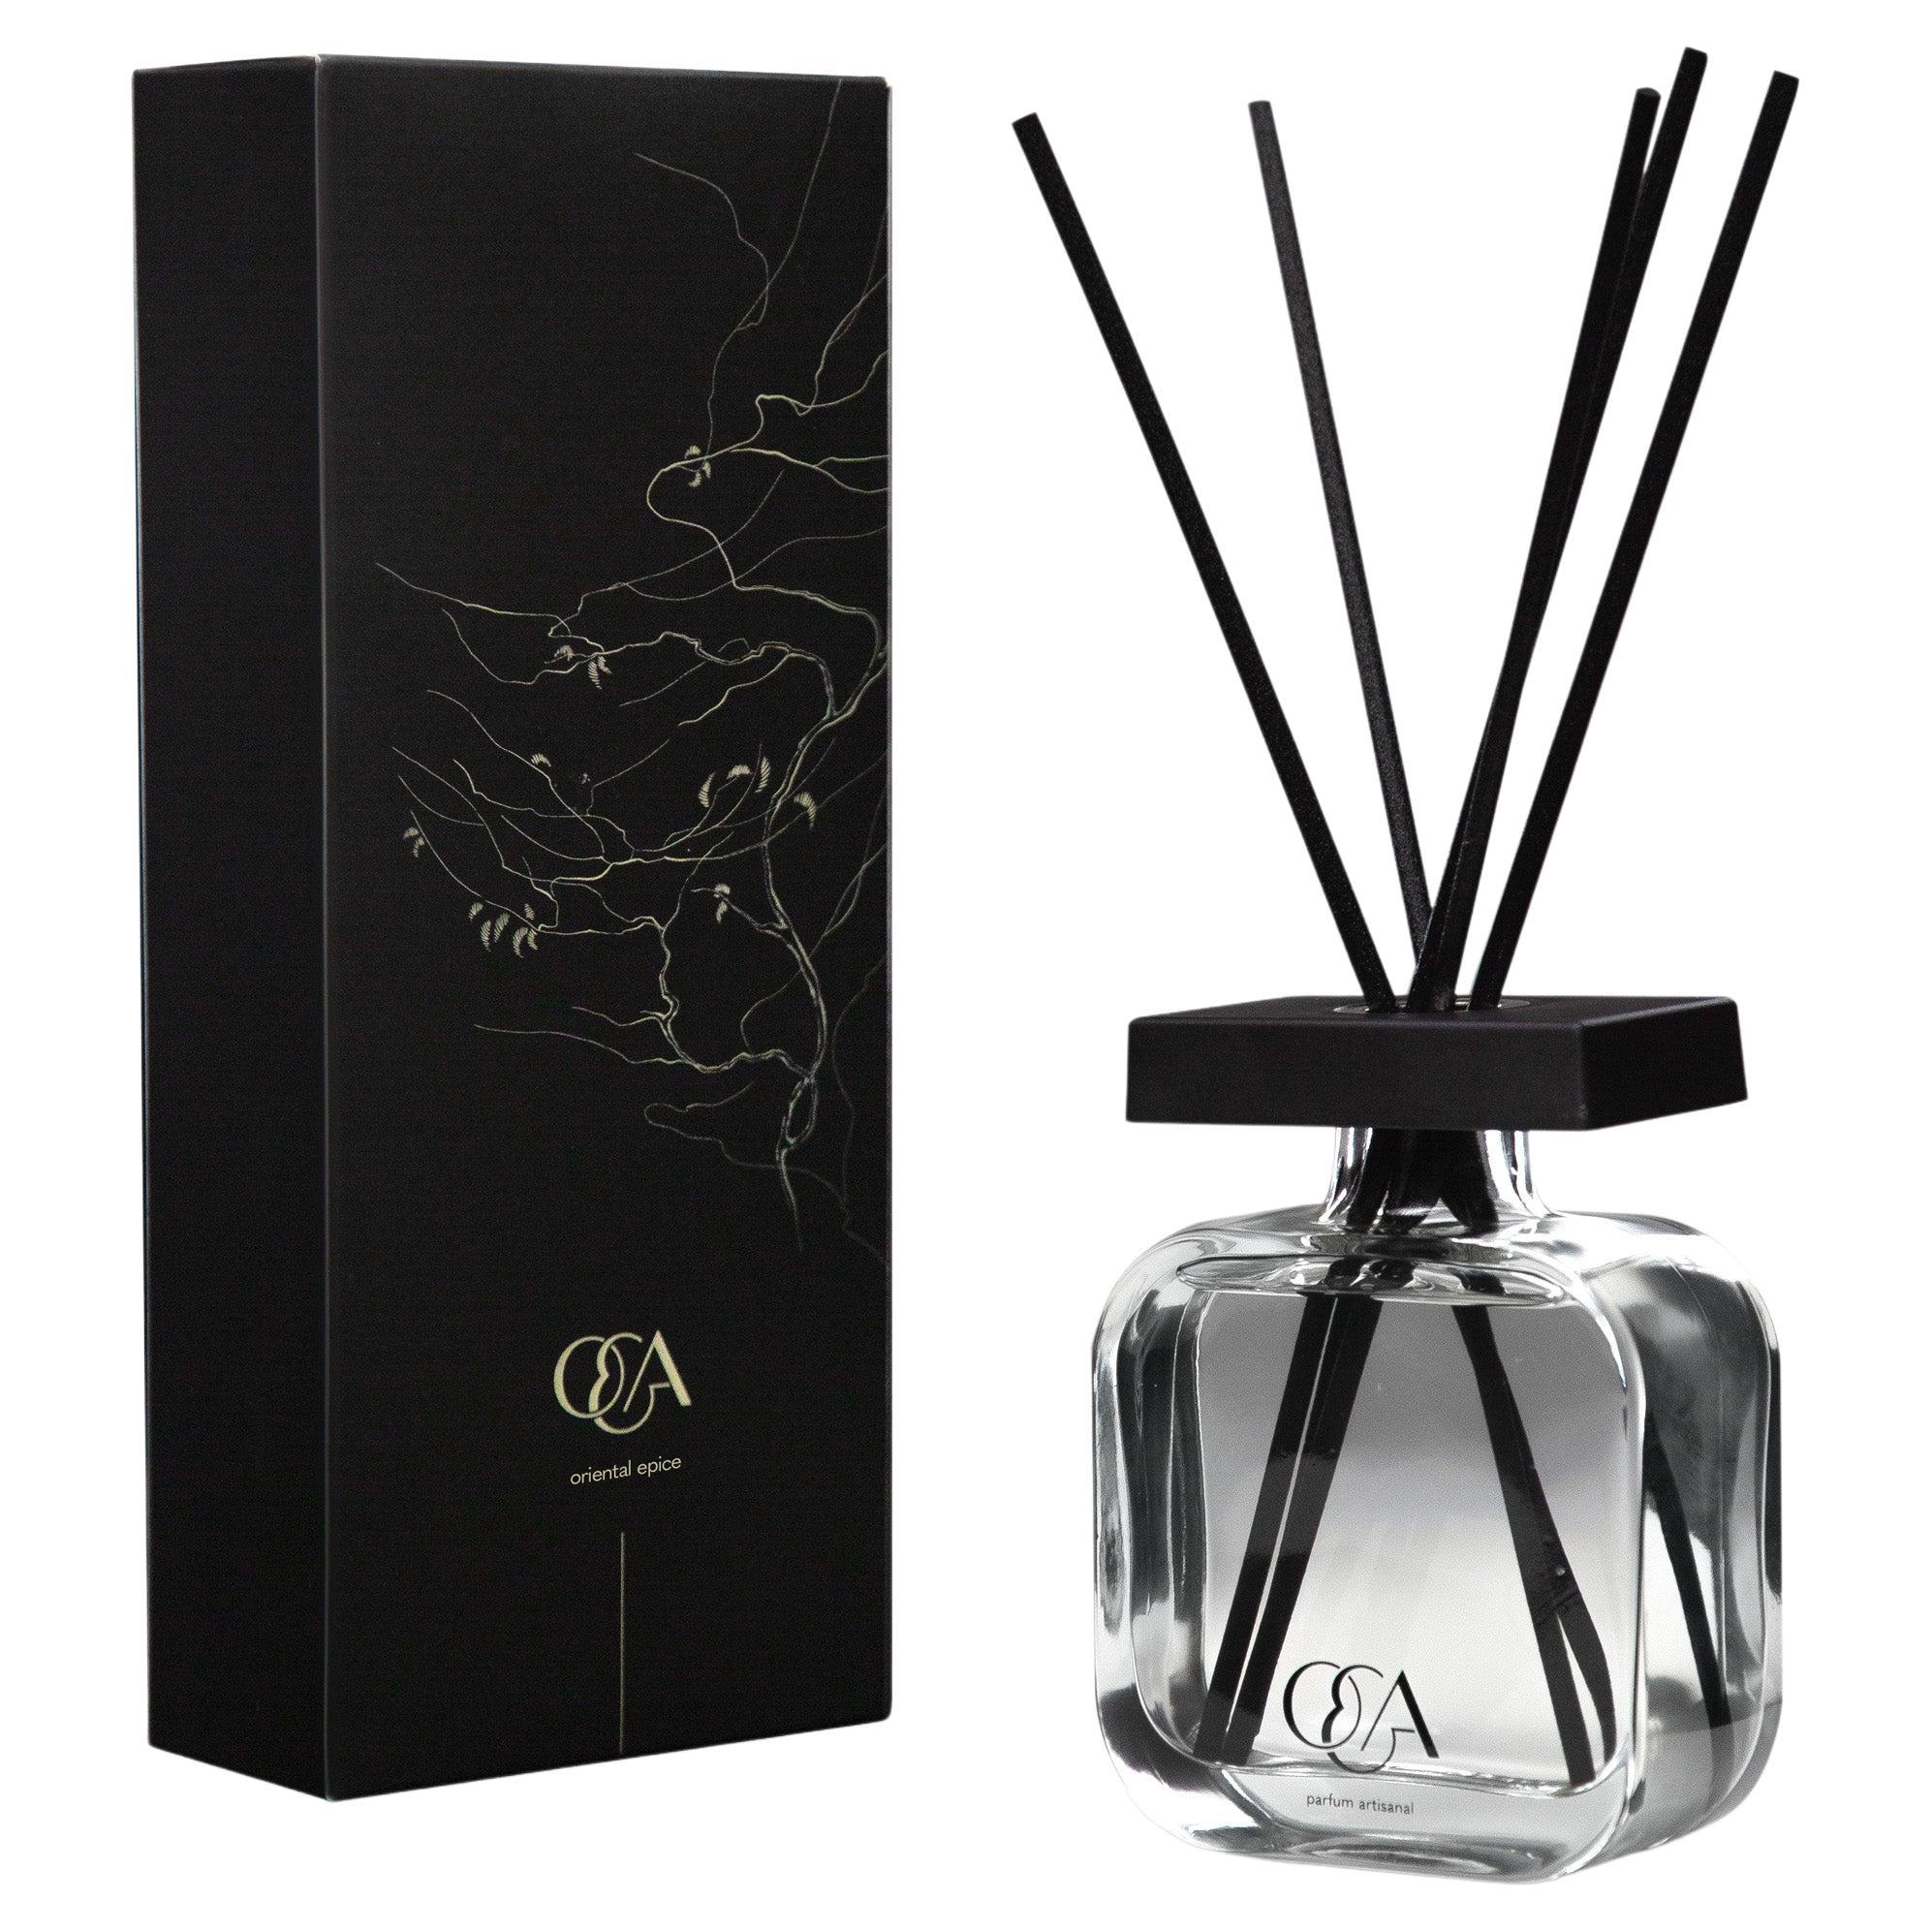 Orienal Épice Reed Diffuser with Vanilla and Cinnamon Scent For Sale